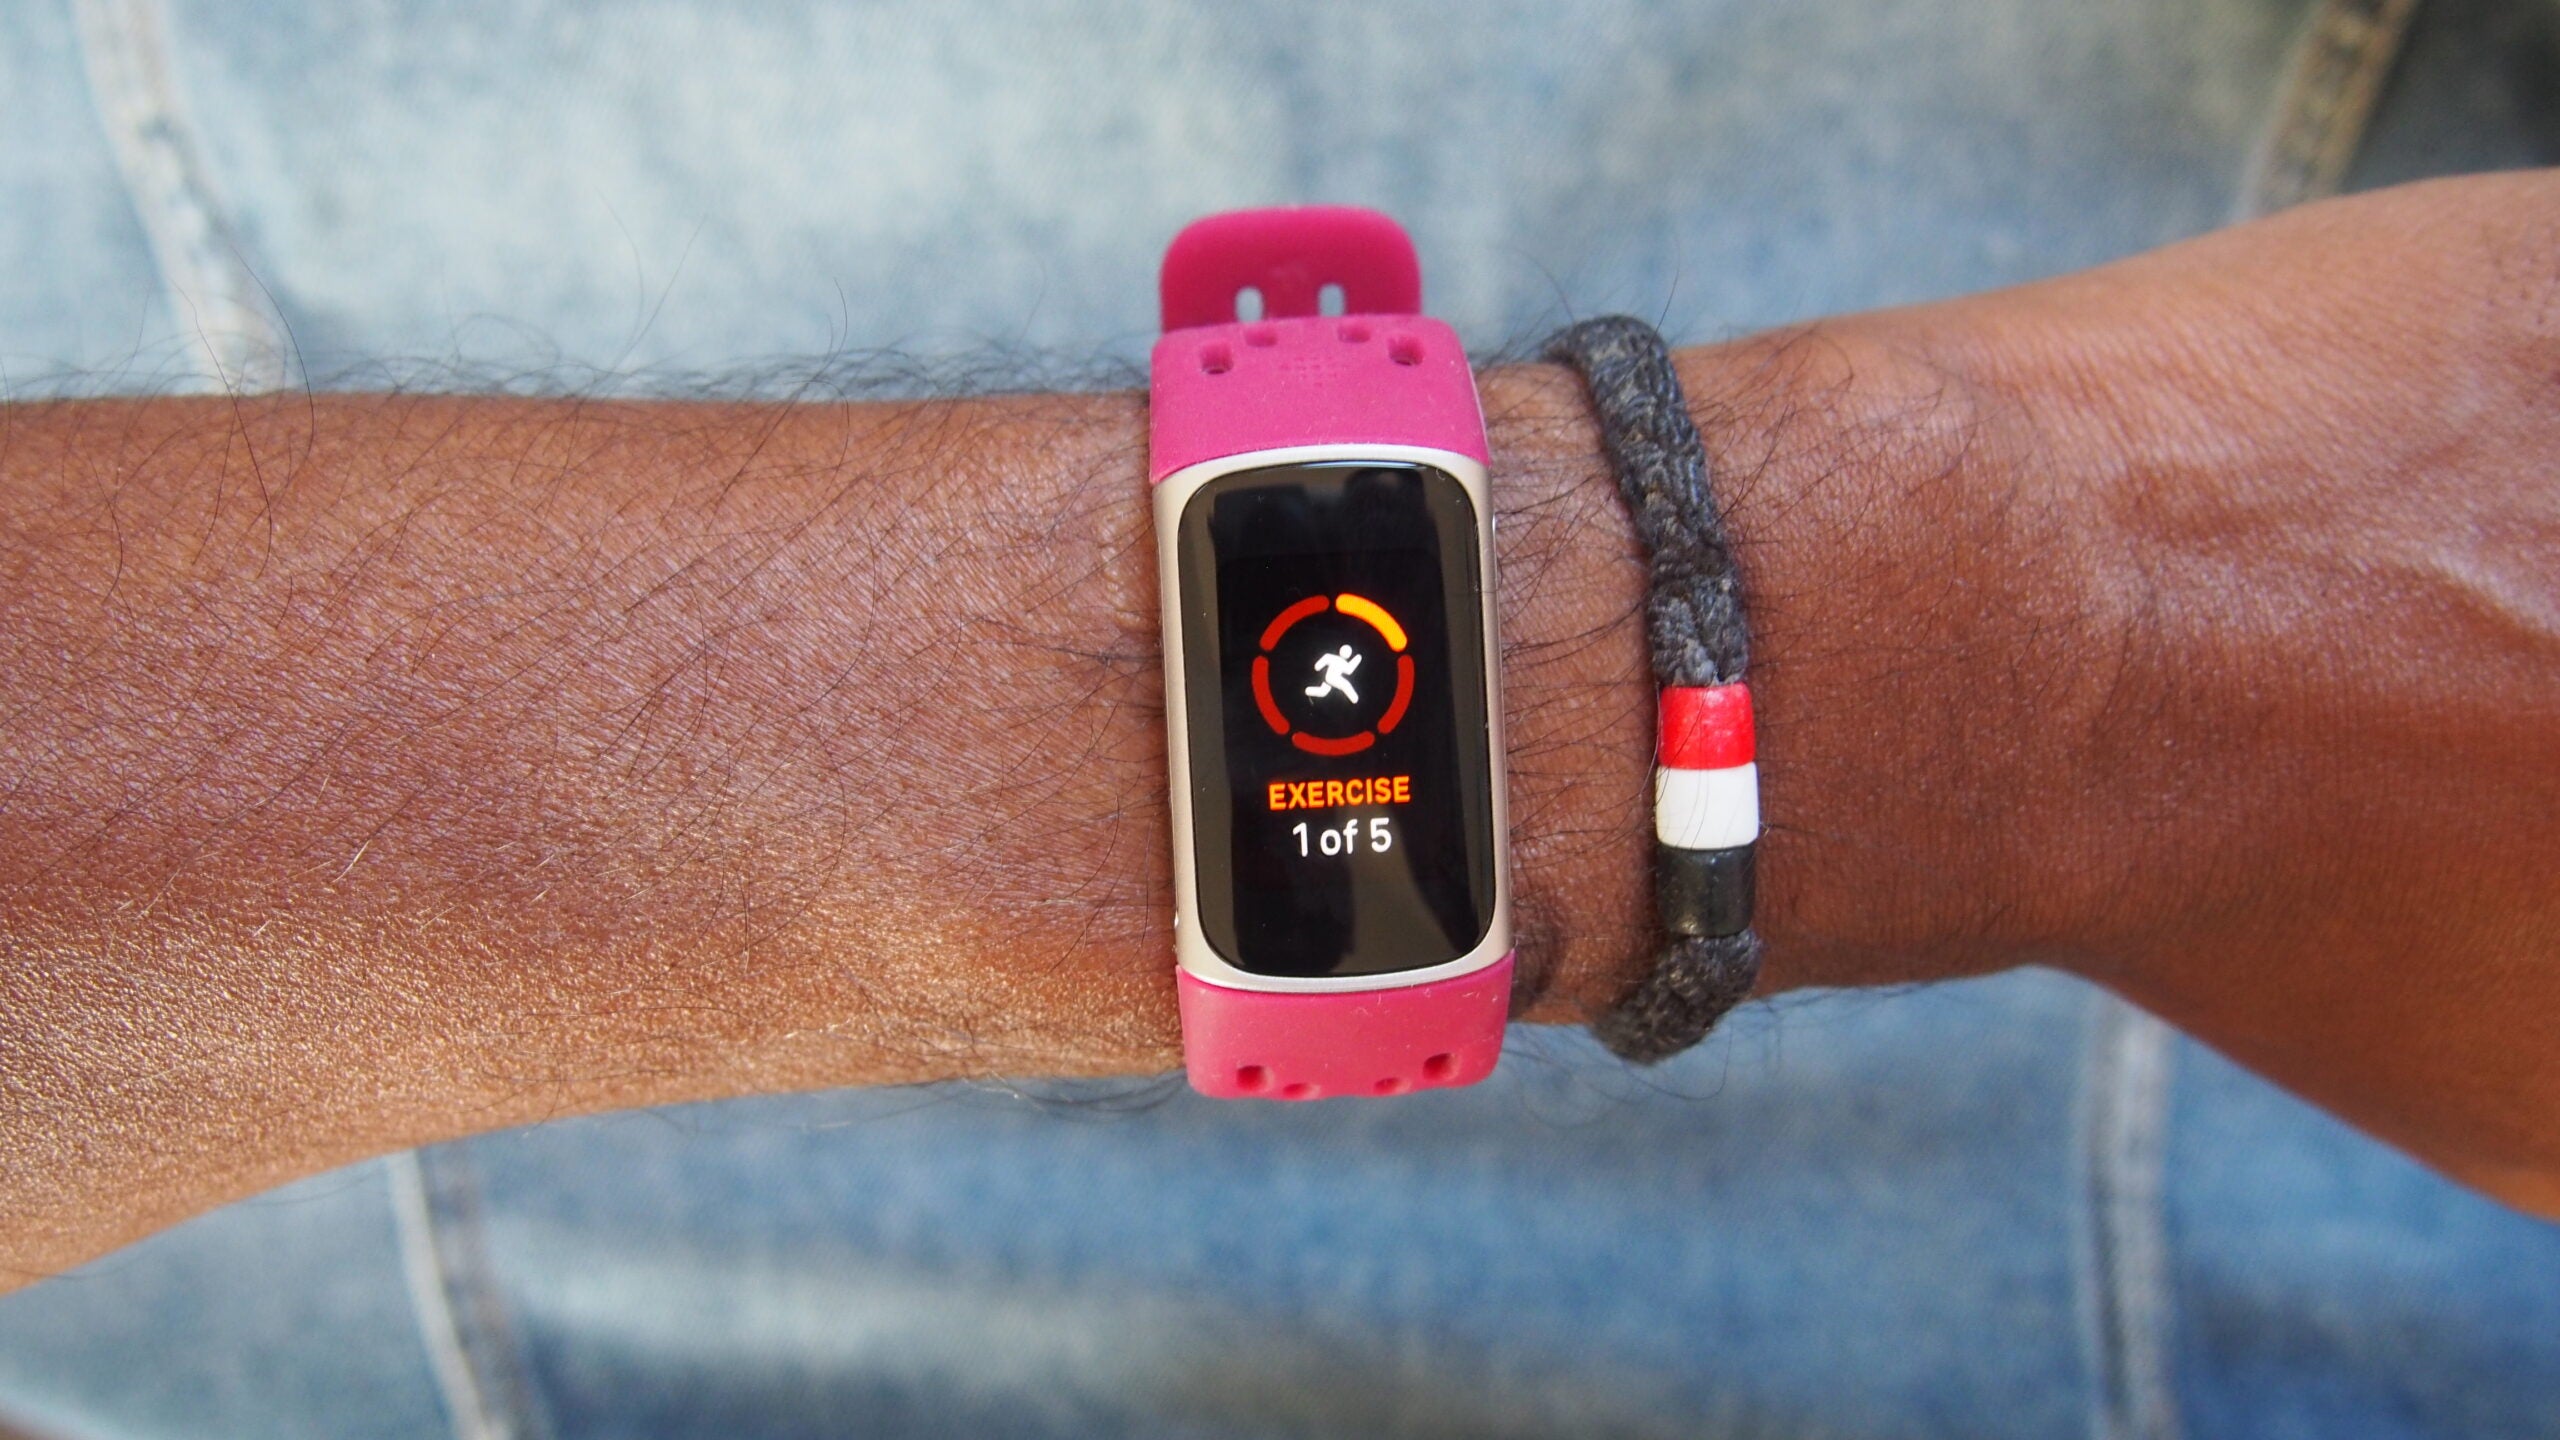 The Accuracy of Fitness Trackers: Is It Reliable?